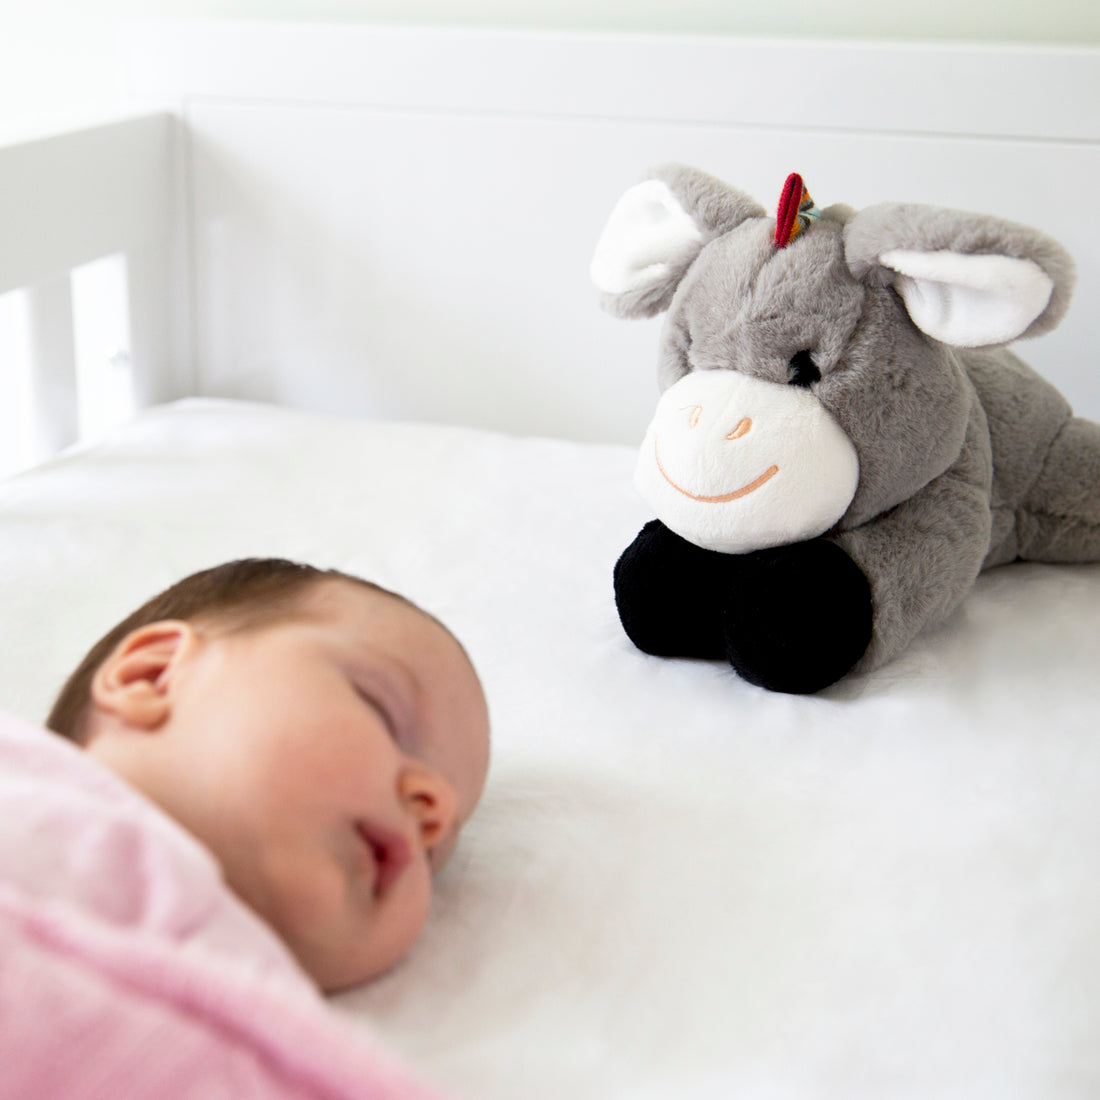 Don the Donkey – my solution to unsettled babies